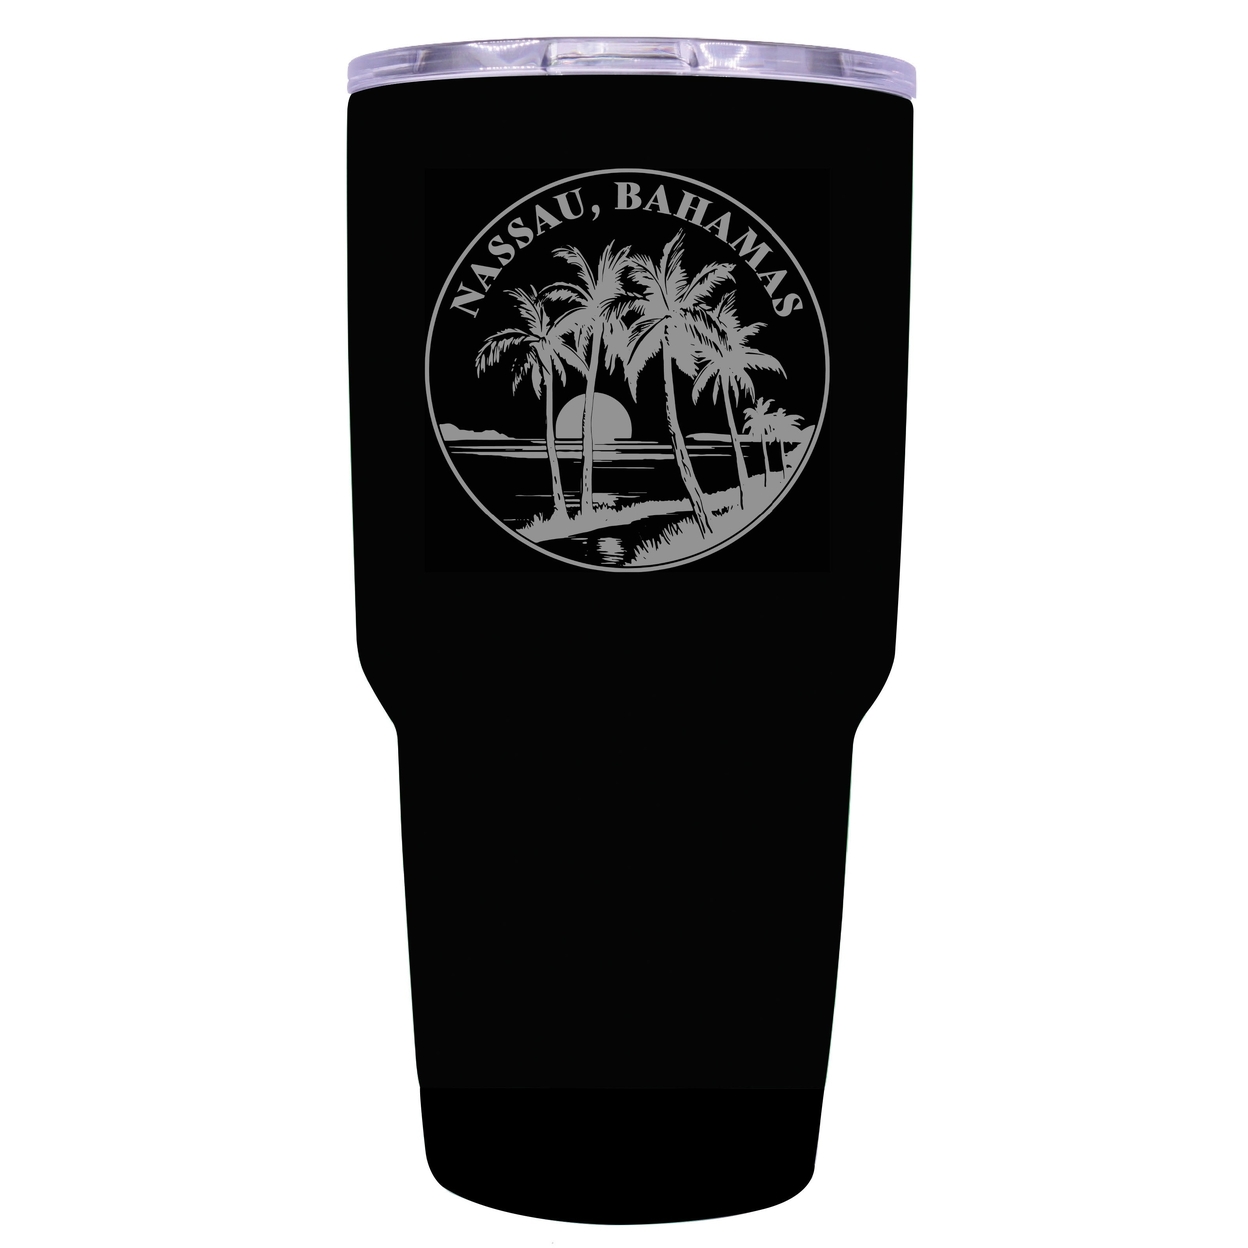 Nassau The Bahamas Souvenir 24 Oz Engraved Insulated Stainless Steel Tumbler - Black,,4-Pack